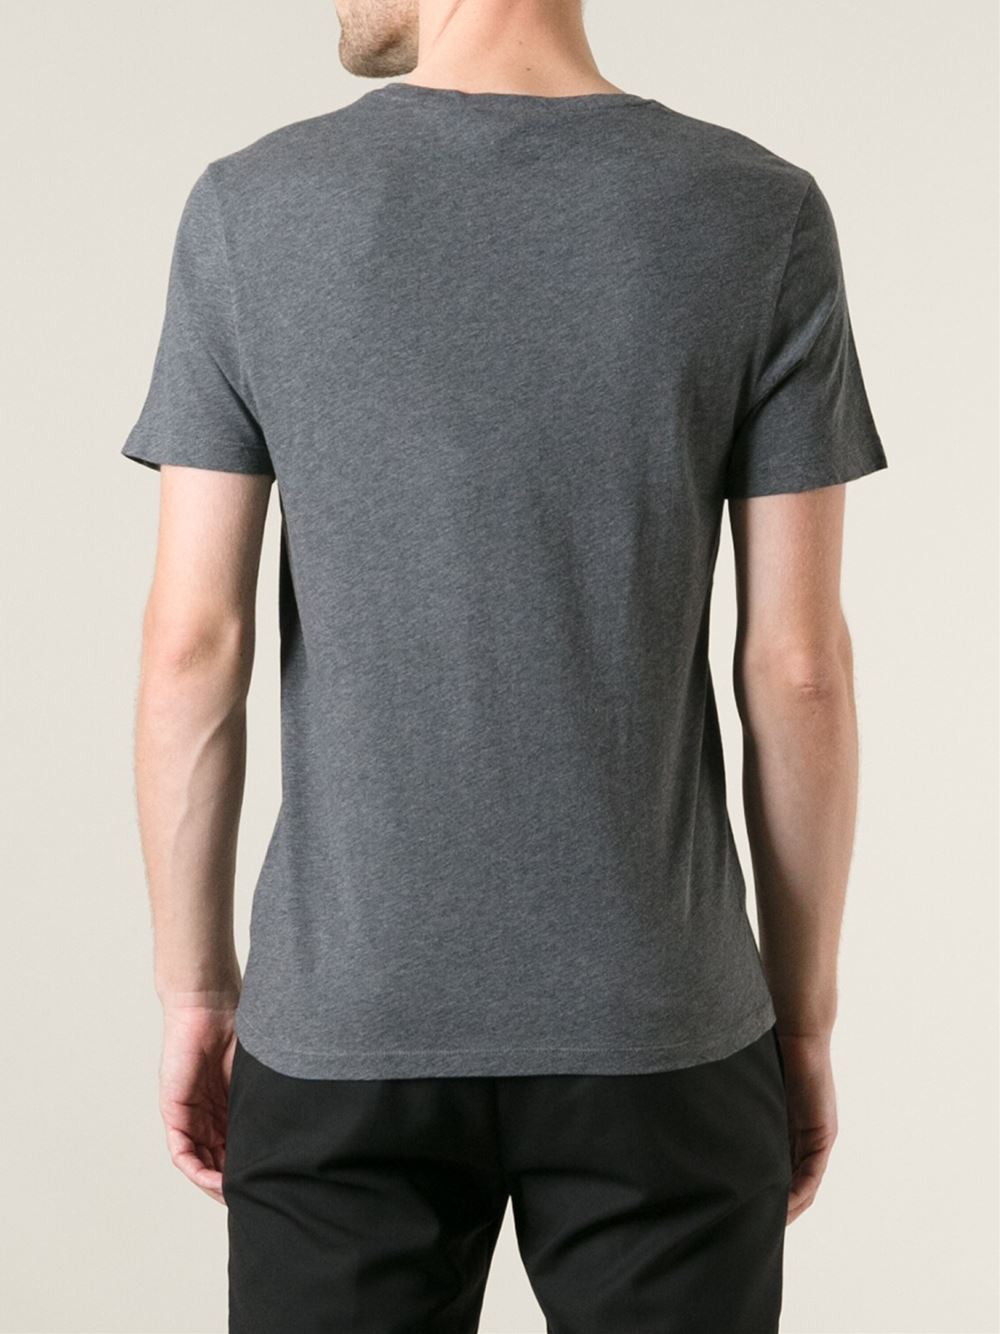 Gucci Printed T-shirt in Grey (Gray) for Men - Lyst